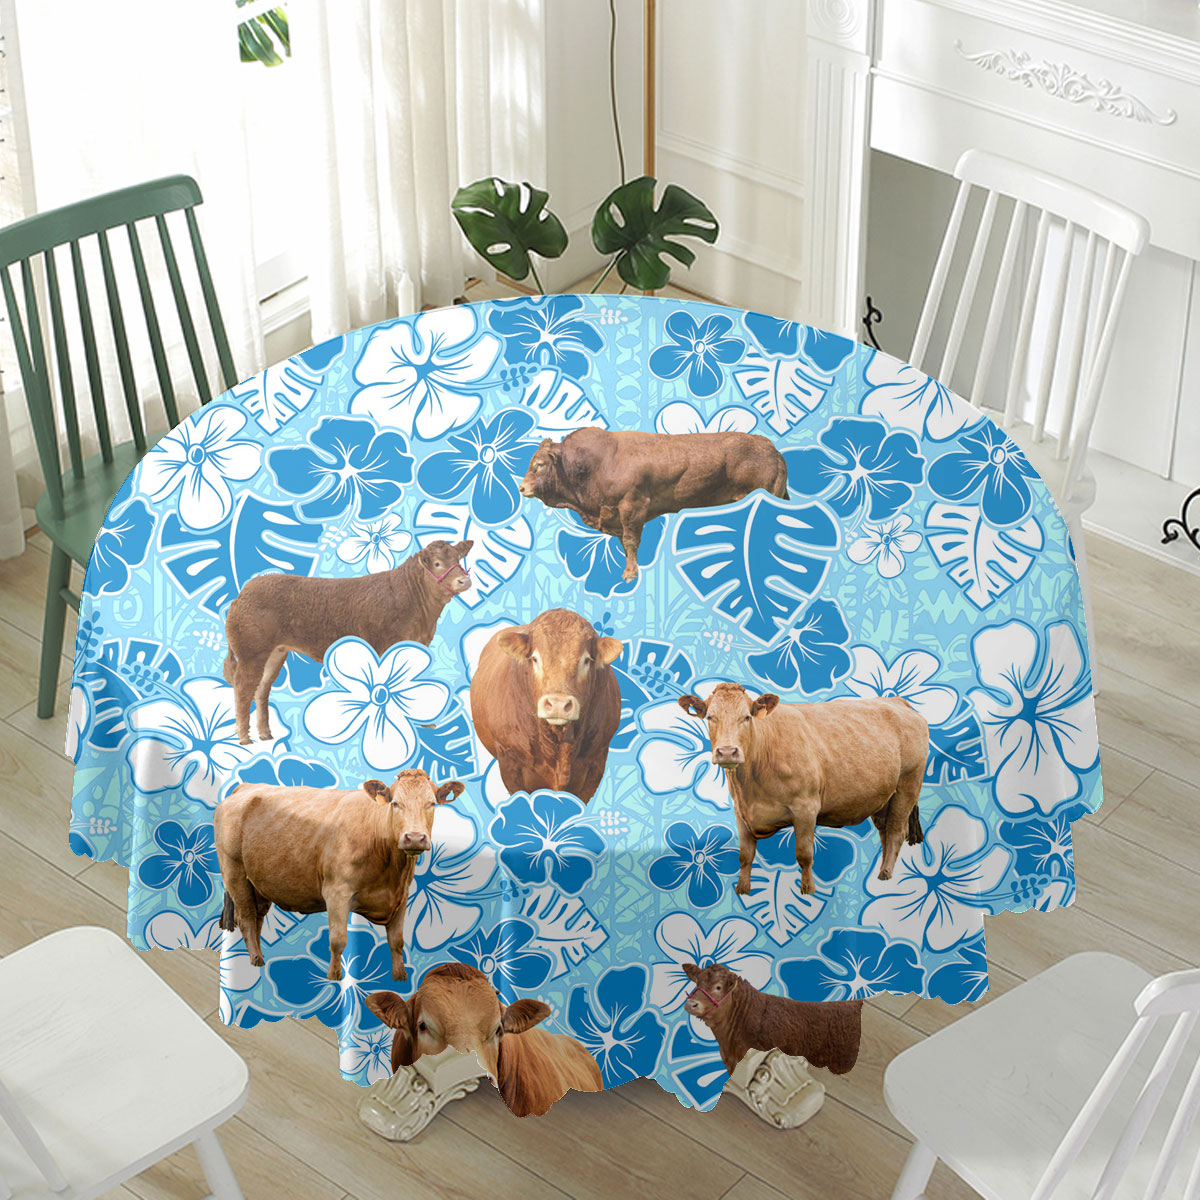 Limousin Blue Floral Waterproof Tablecloth